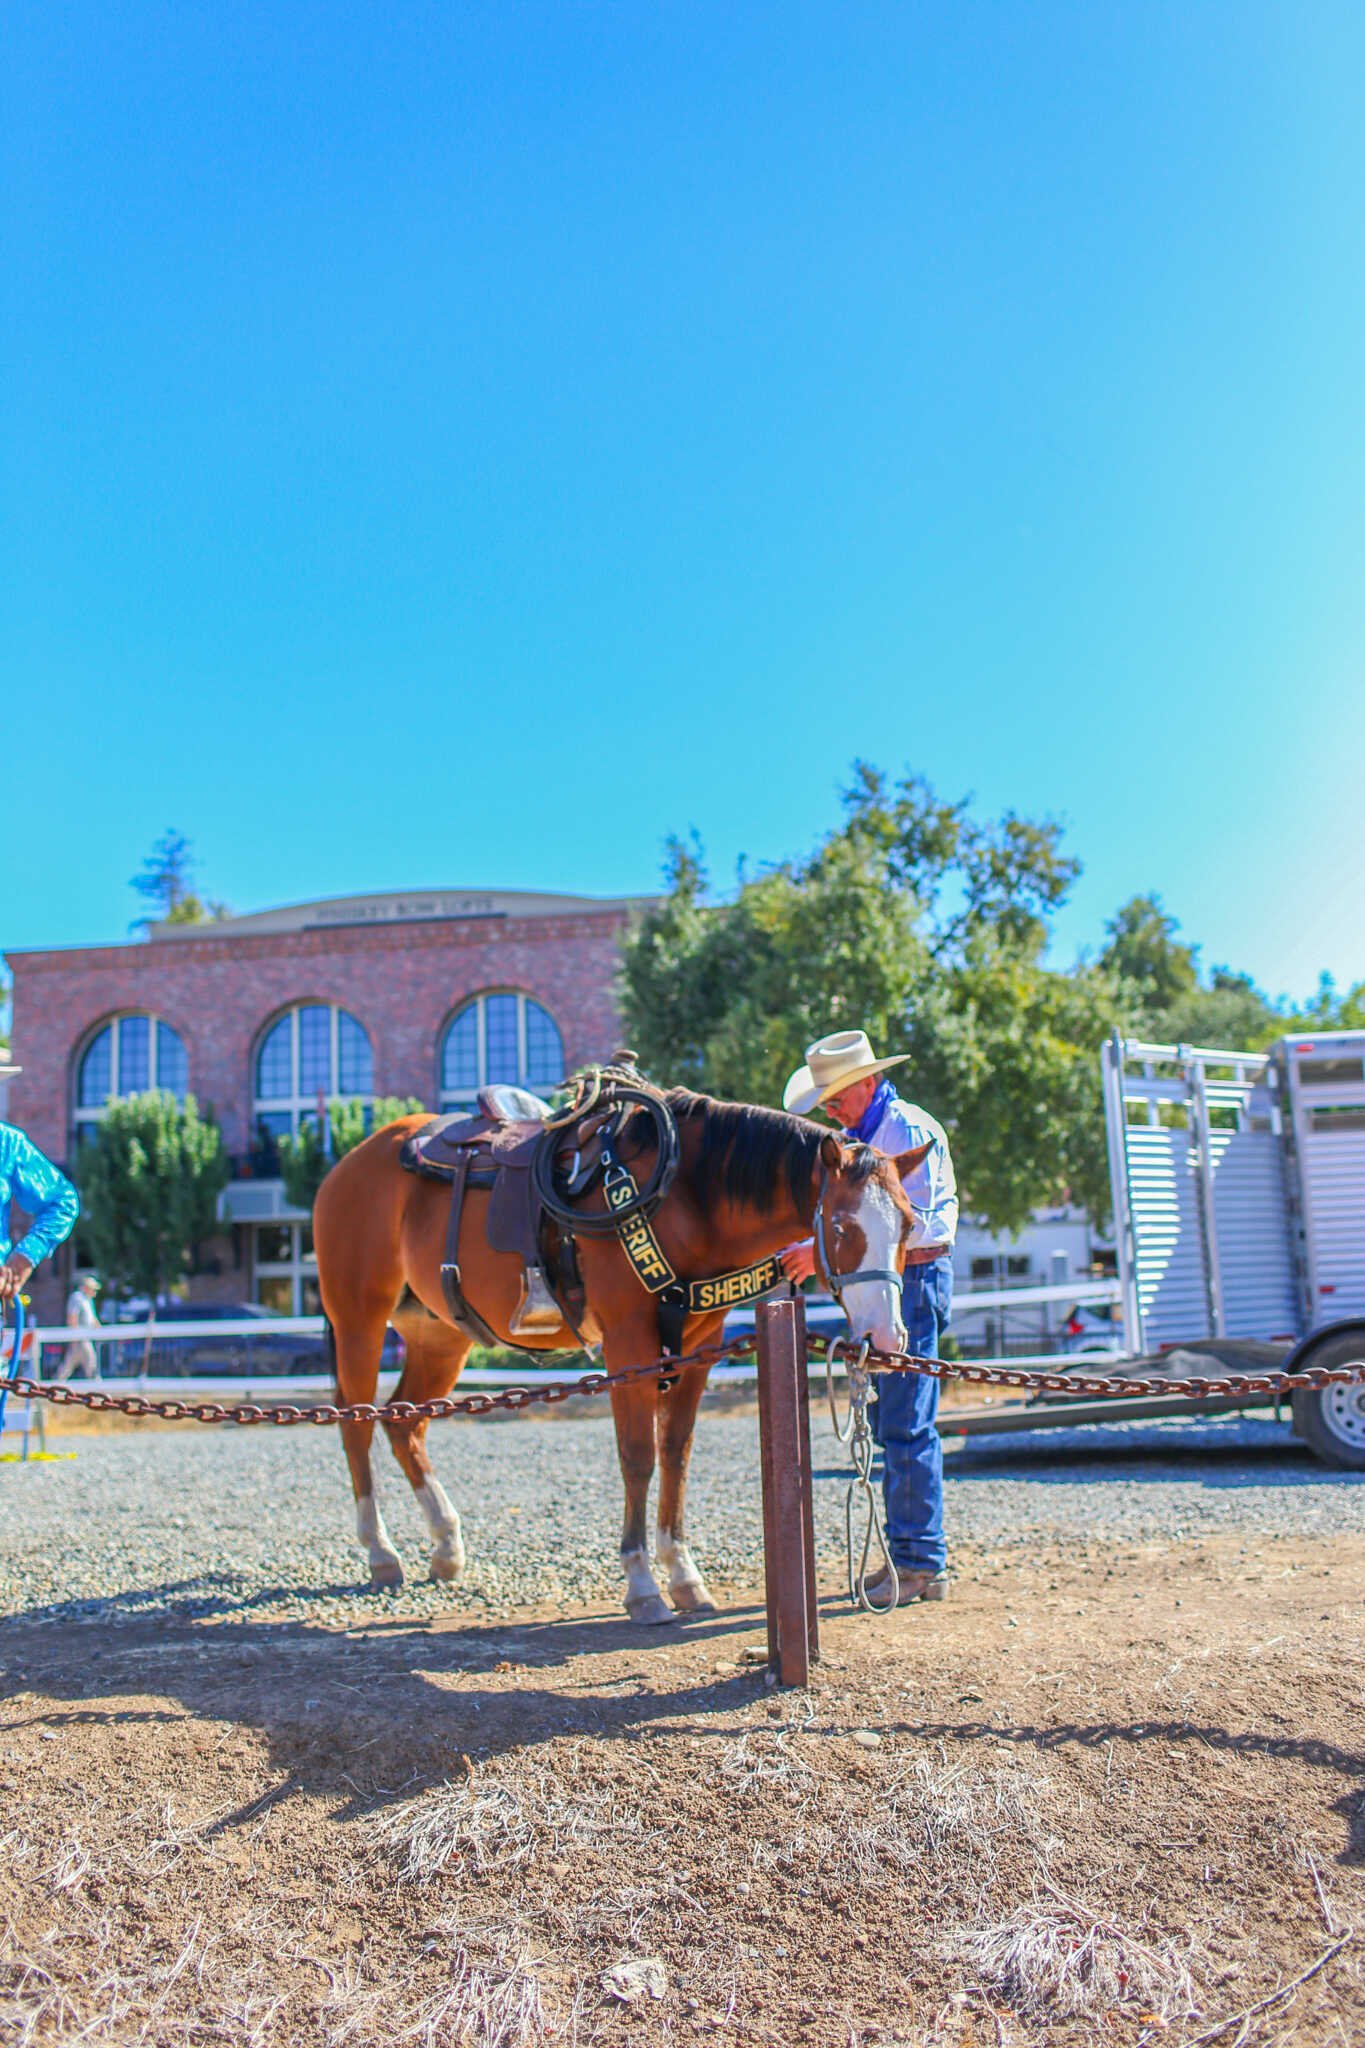 Family Travel Guide to Folsom California - Folsom Police Mounted Patrol Officers.